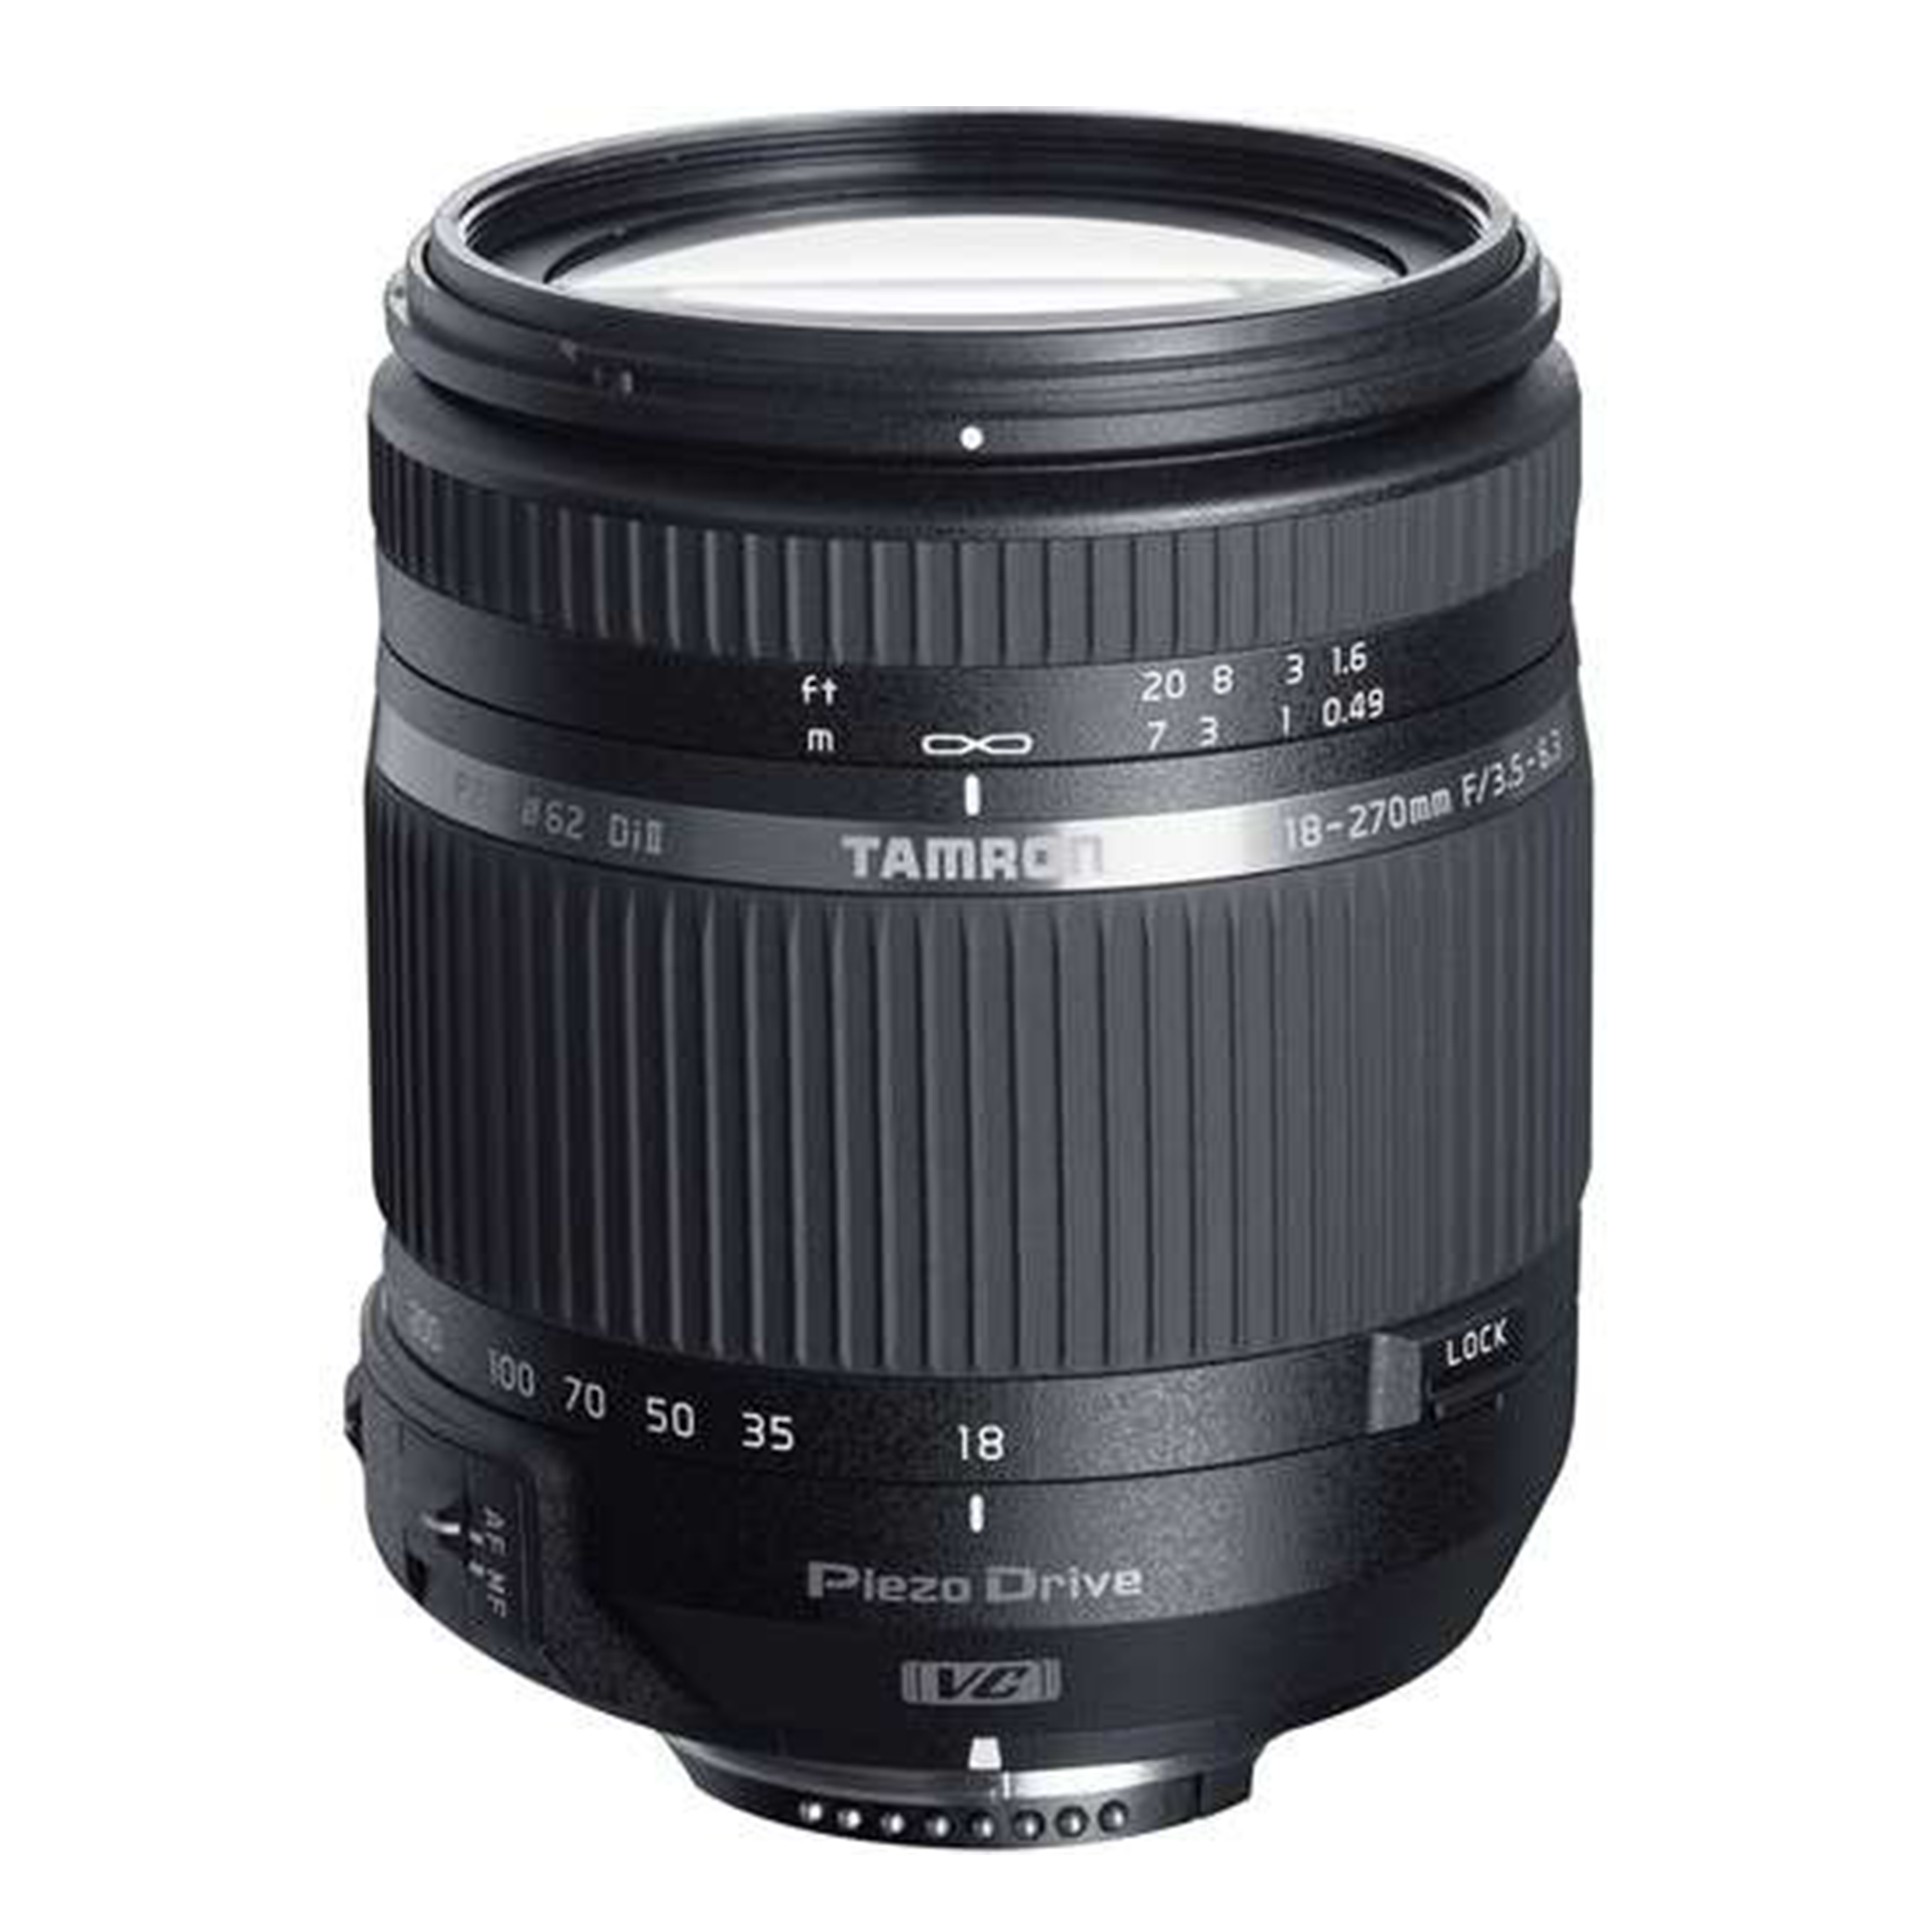 Tamron 18-270mm f/3.5-6.3 Di II VC  Lens for Canon